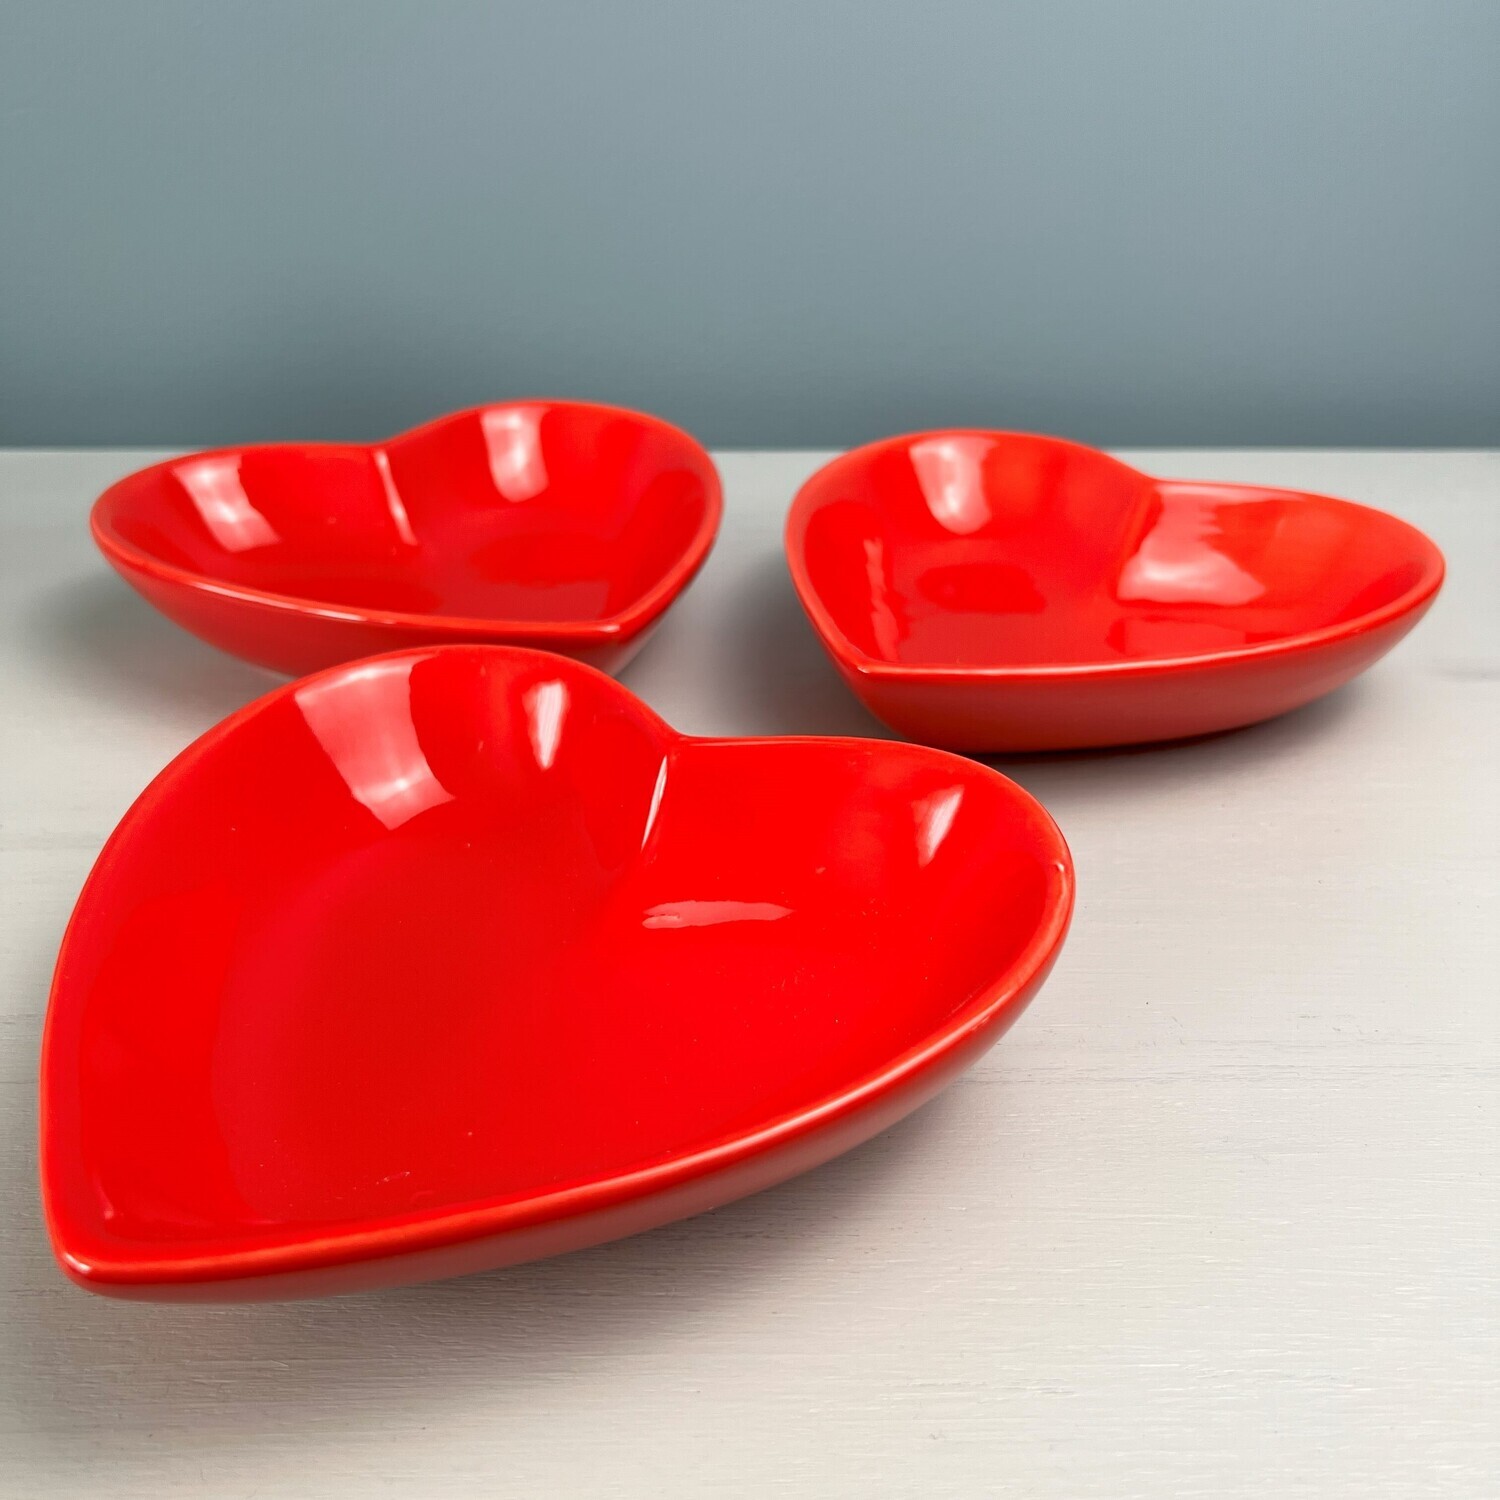 Ceramic Heart Dishes Used​